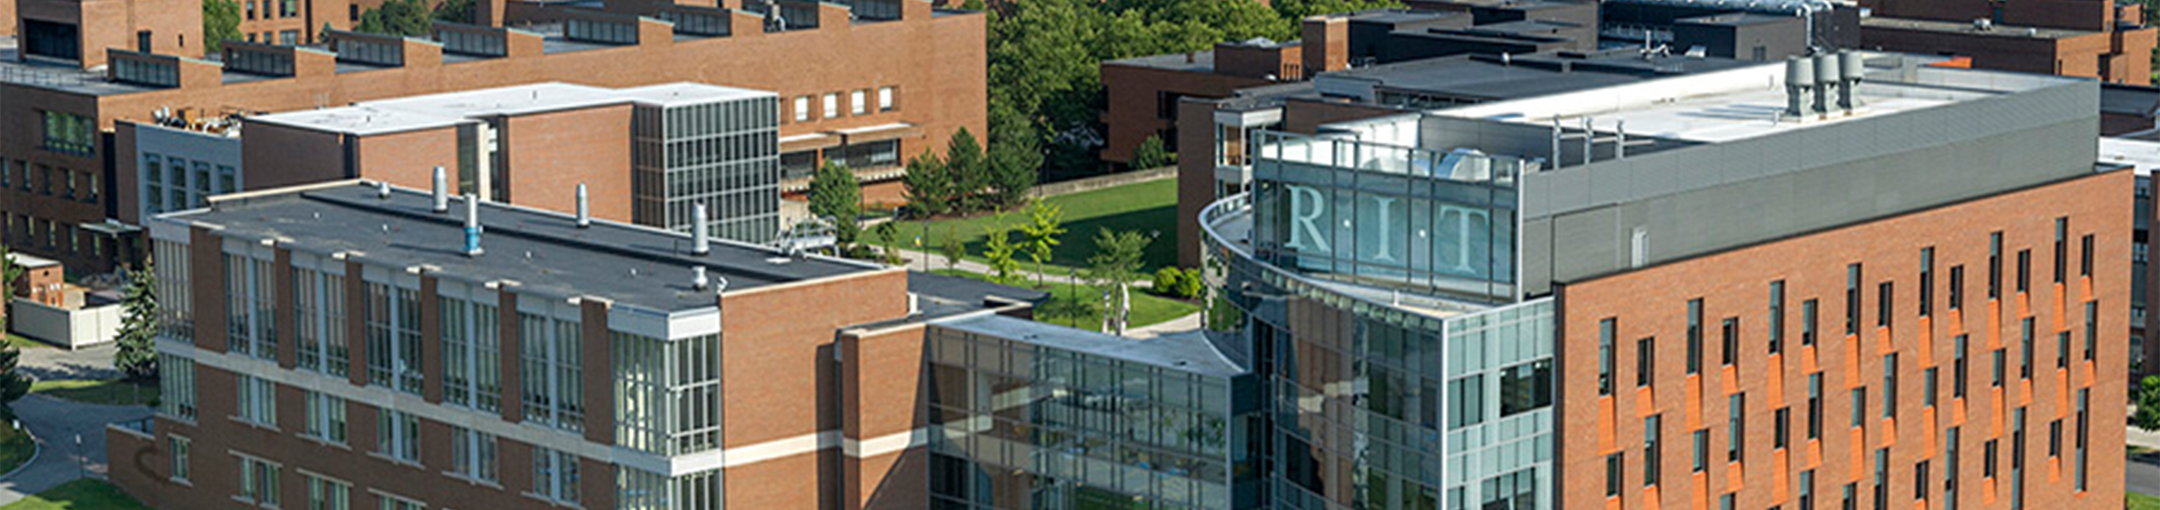 aerial shot of RIT's campus looking at the sustainability building.